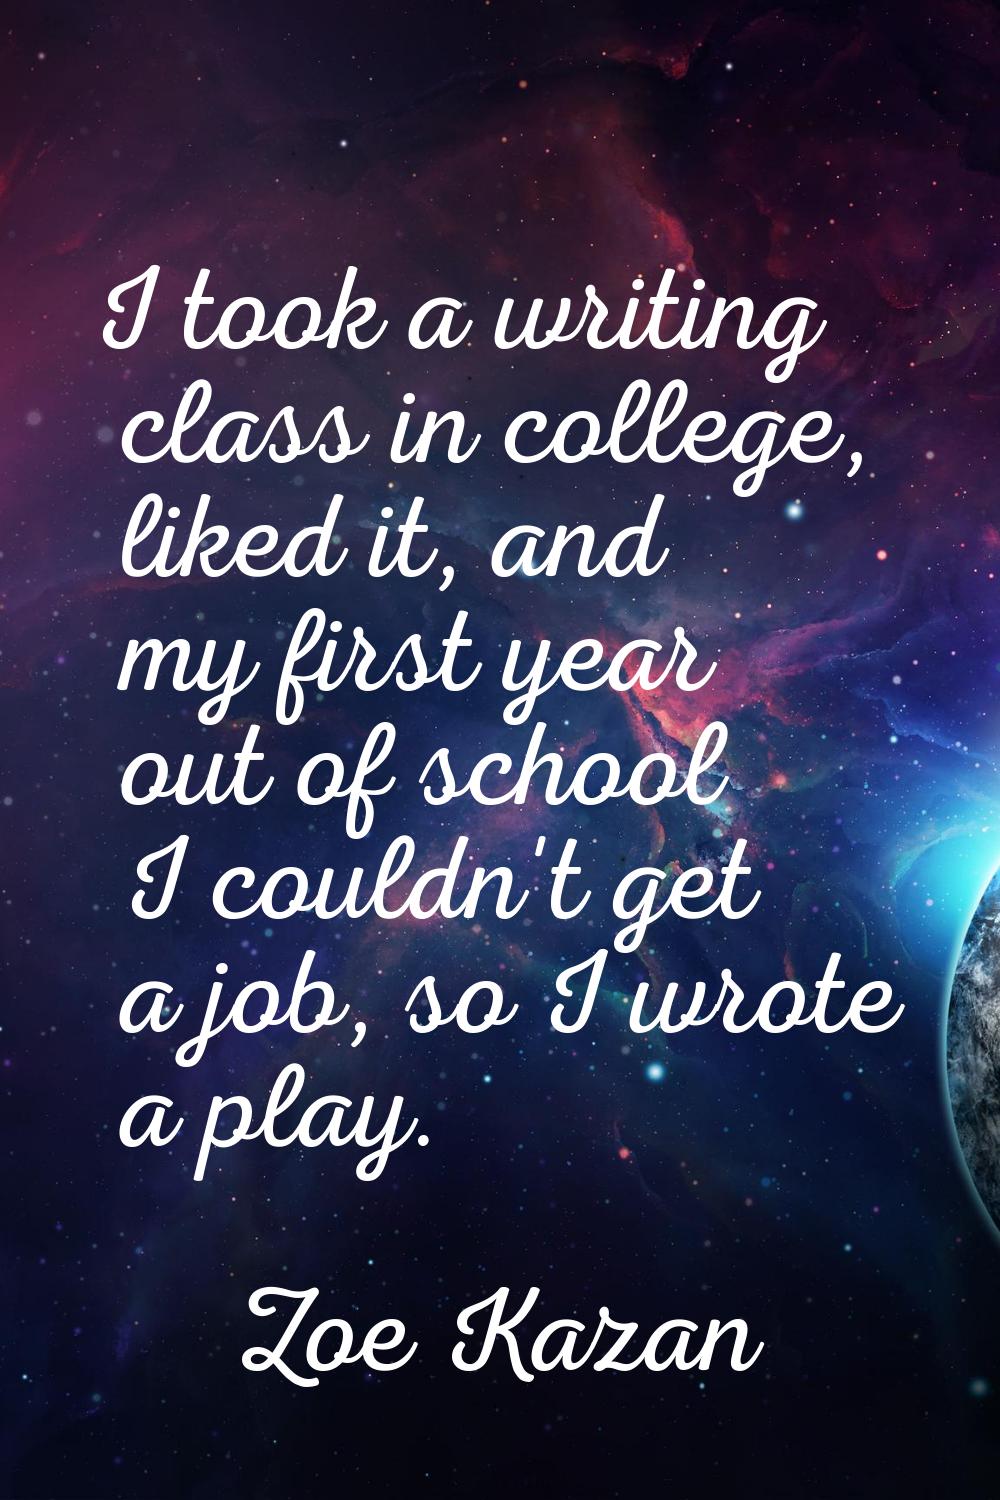 I took a writing class in college, liked it, and my first year out of school I couldn't get a job, 